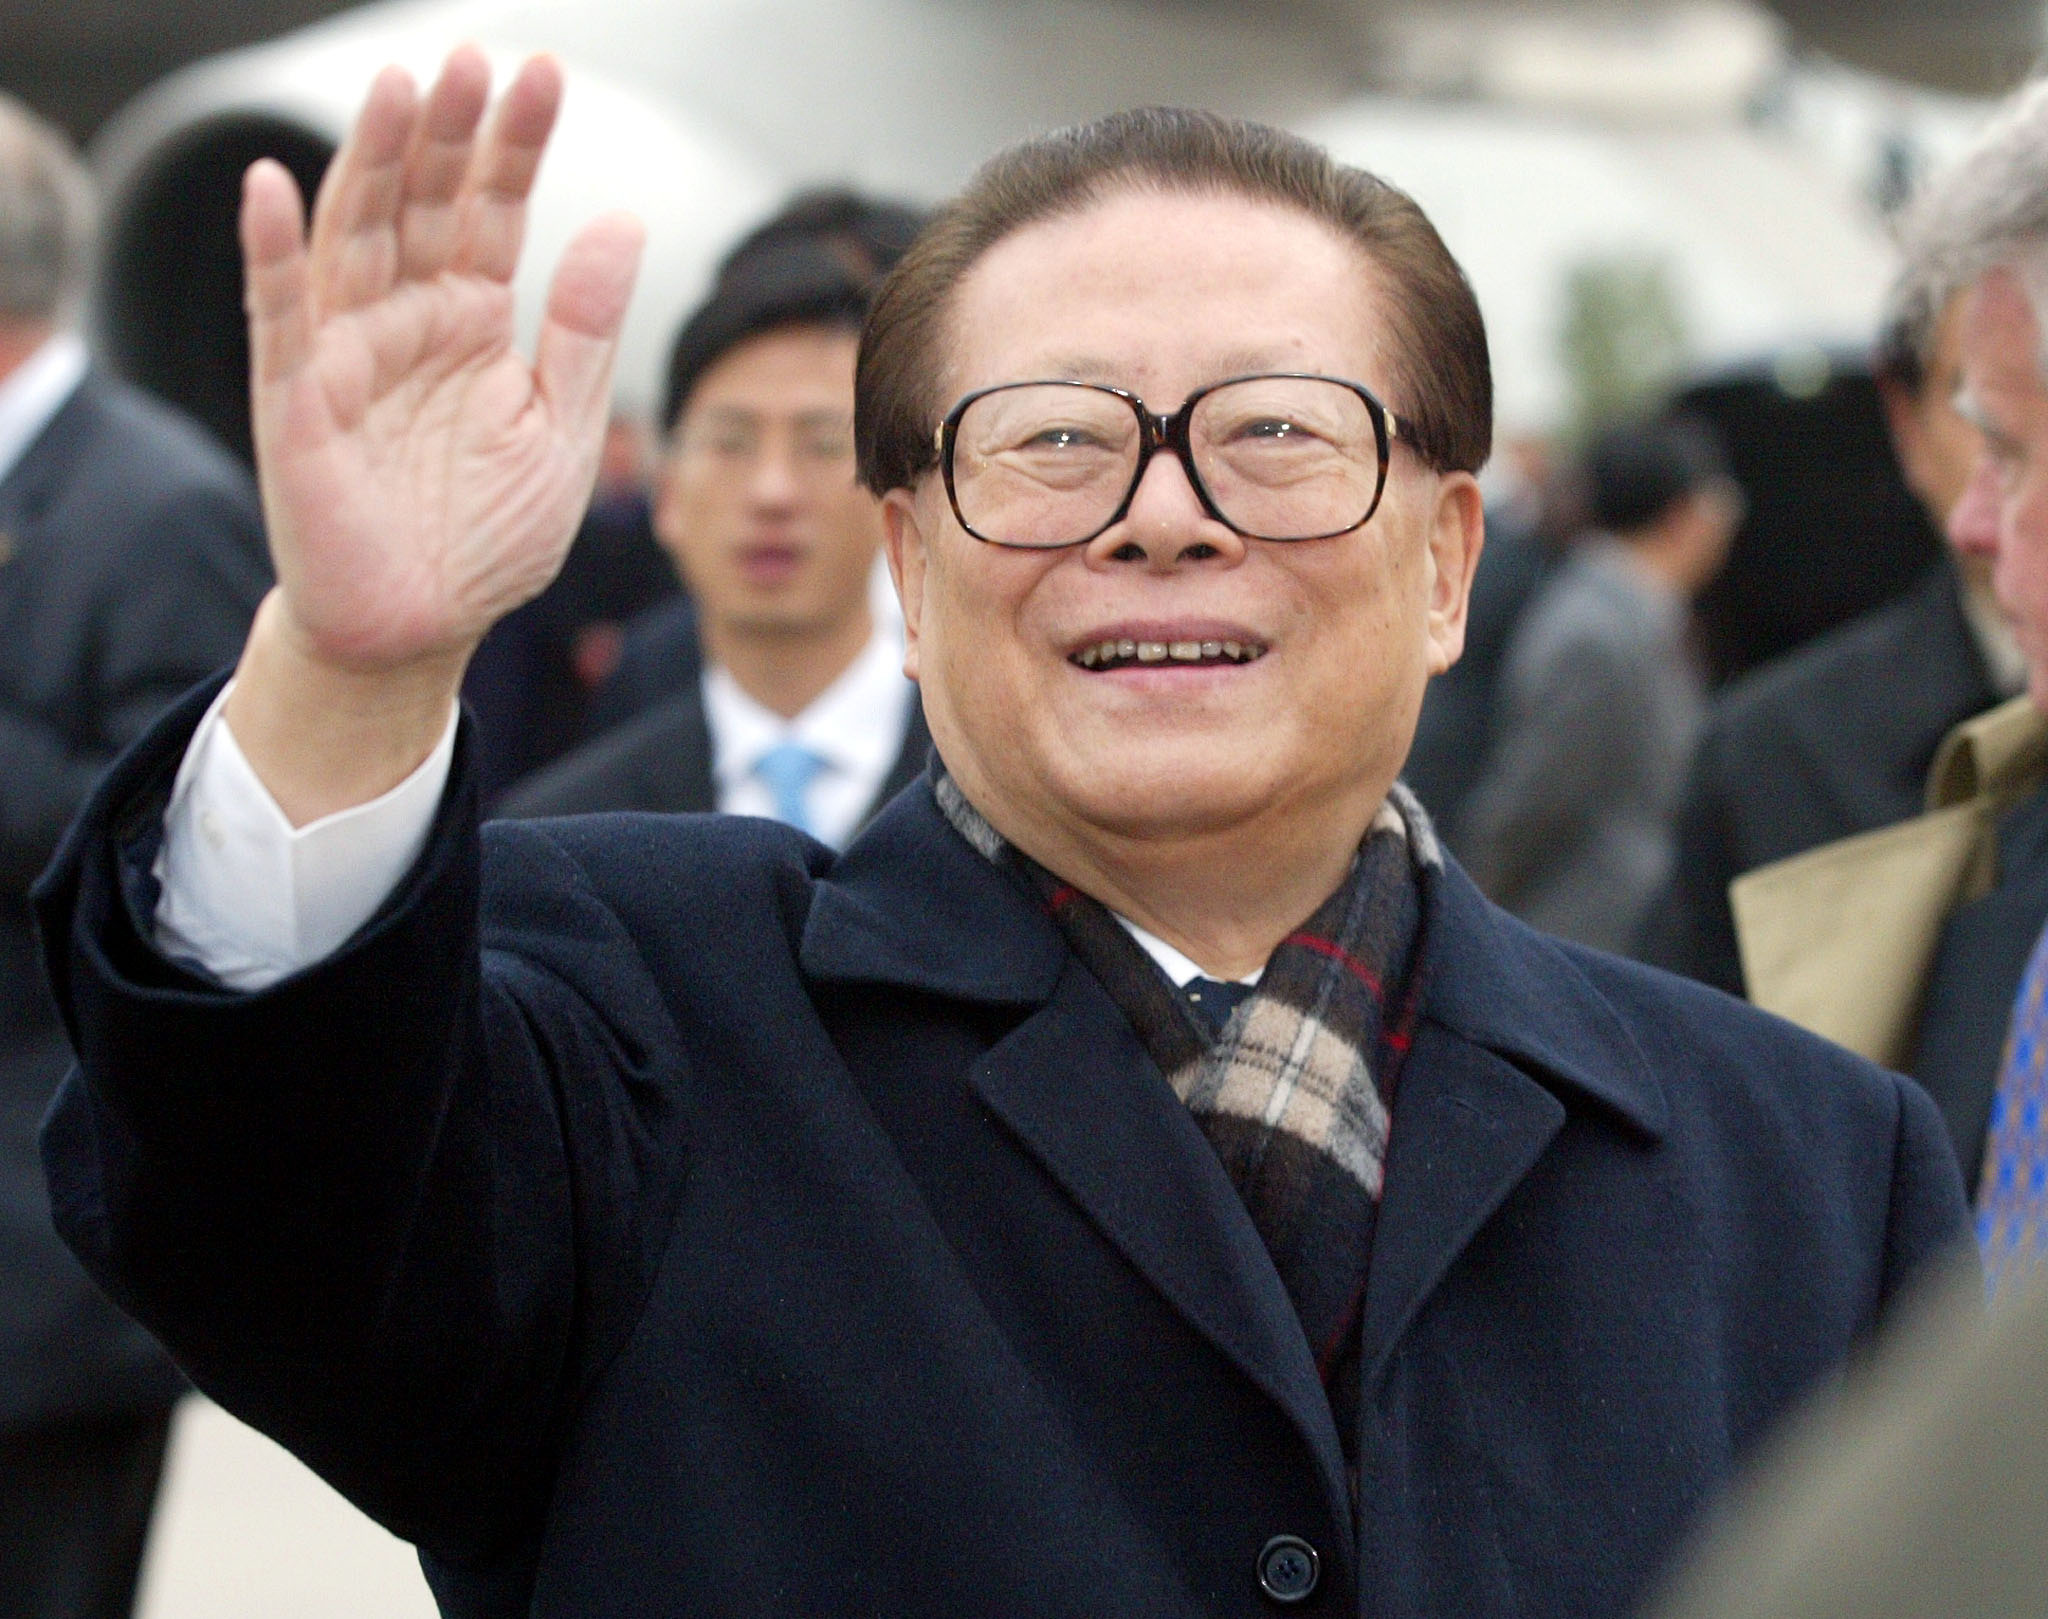 CHINESE PRESIDENT JIANG ZEMIN WAVES TO SUPPORTERS.